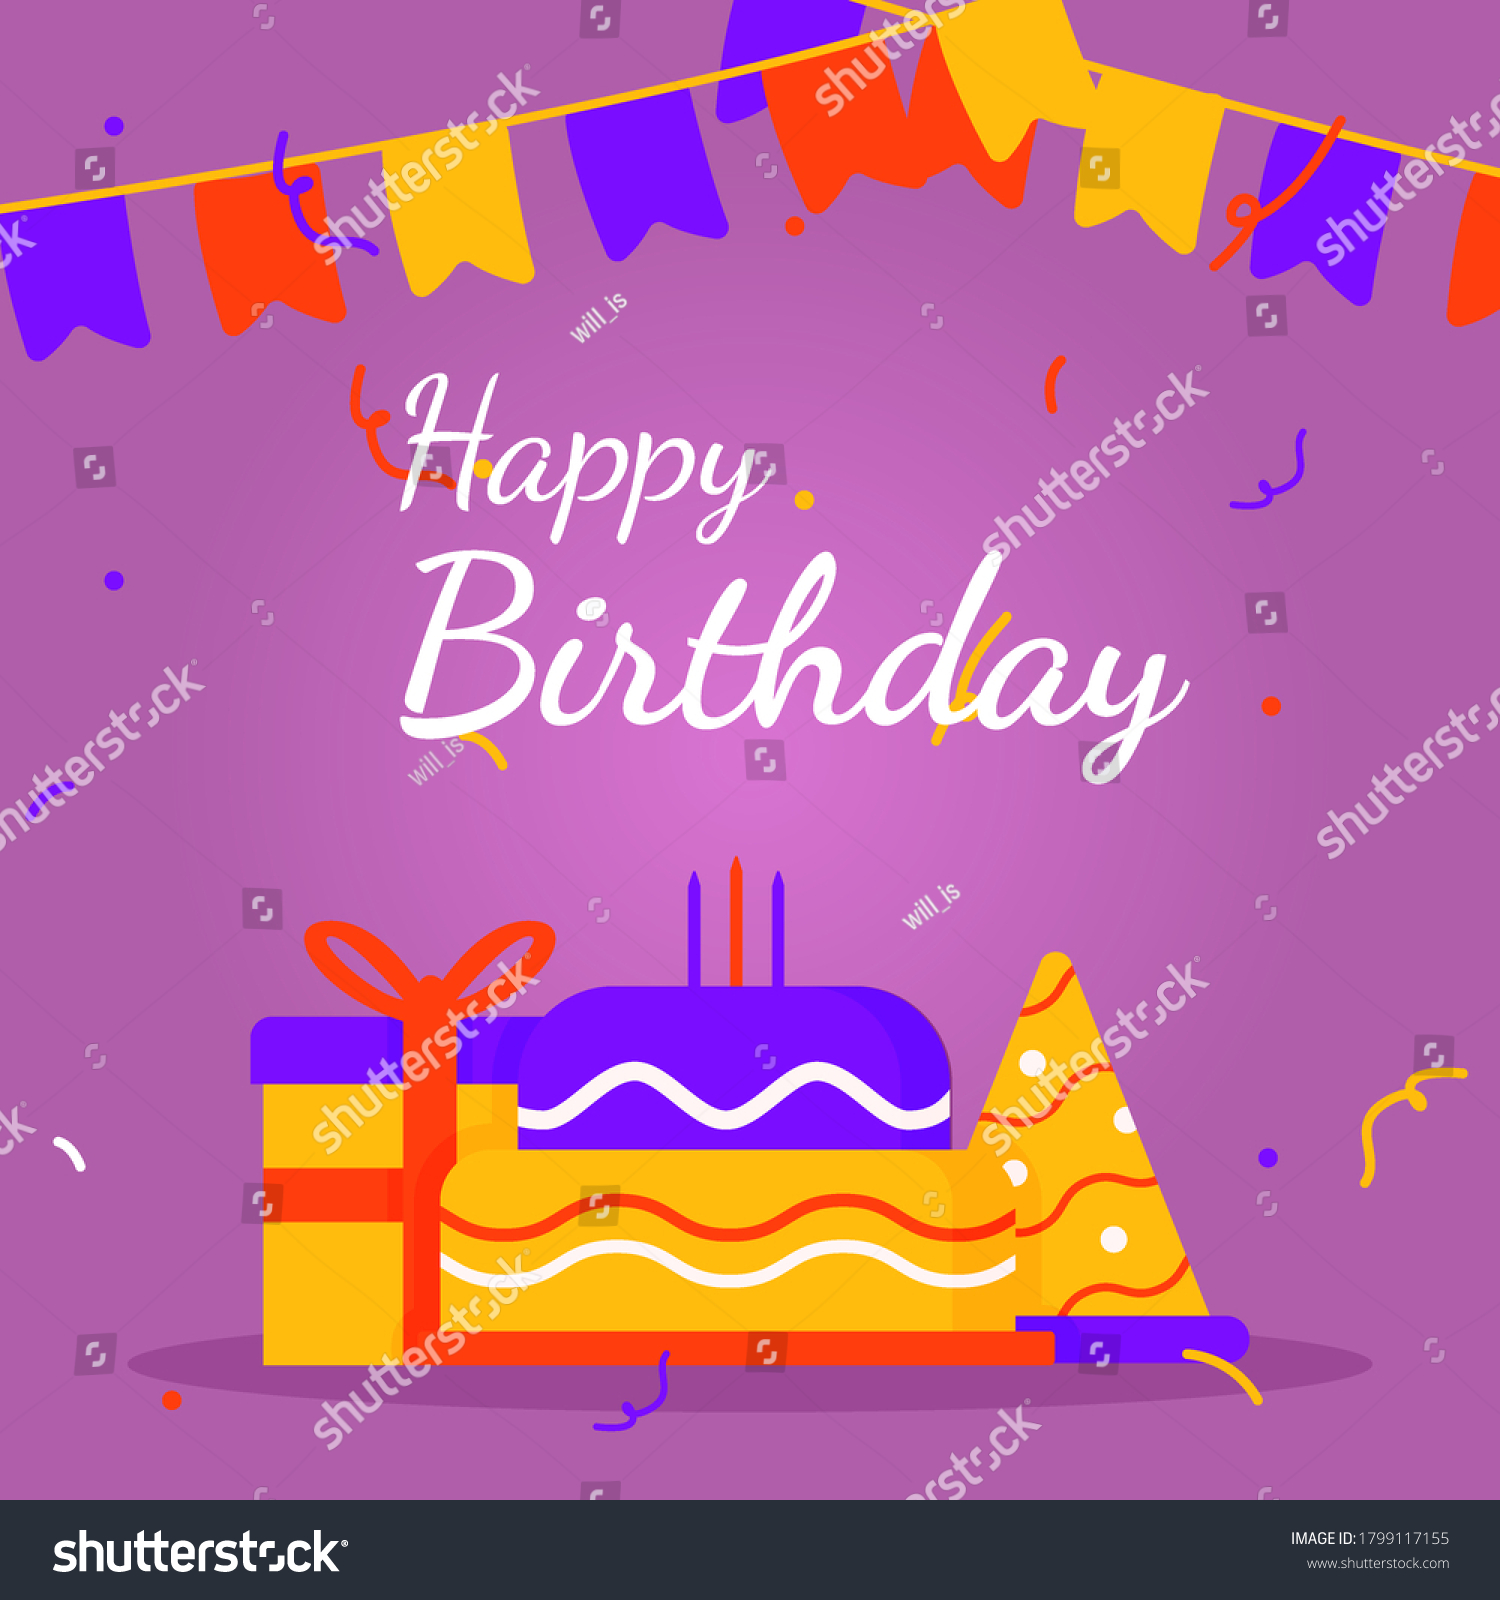 Greeting Happy Birthday Banner Square Social Stock Vector (Royalty Free ...